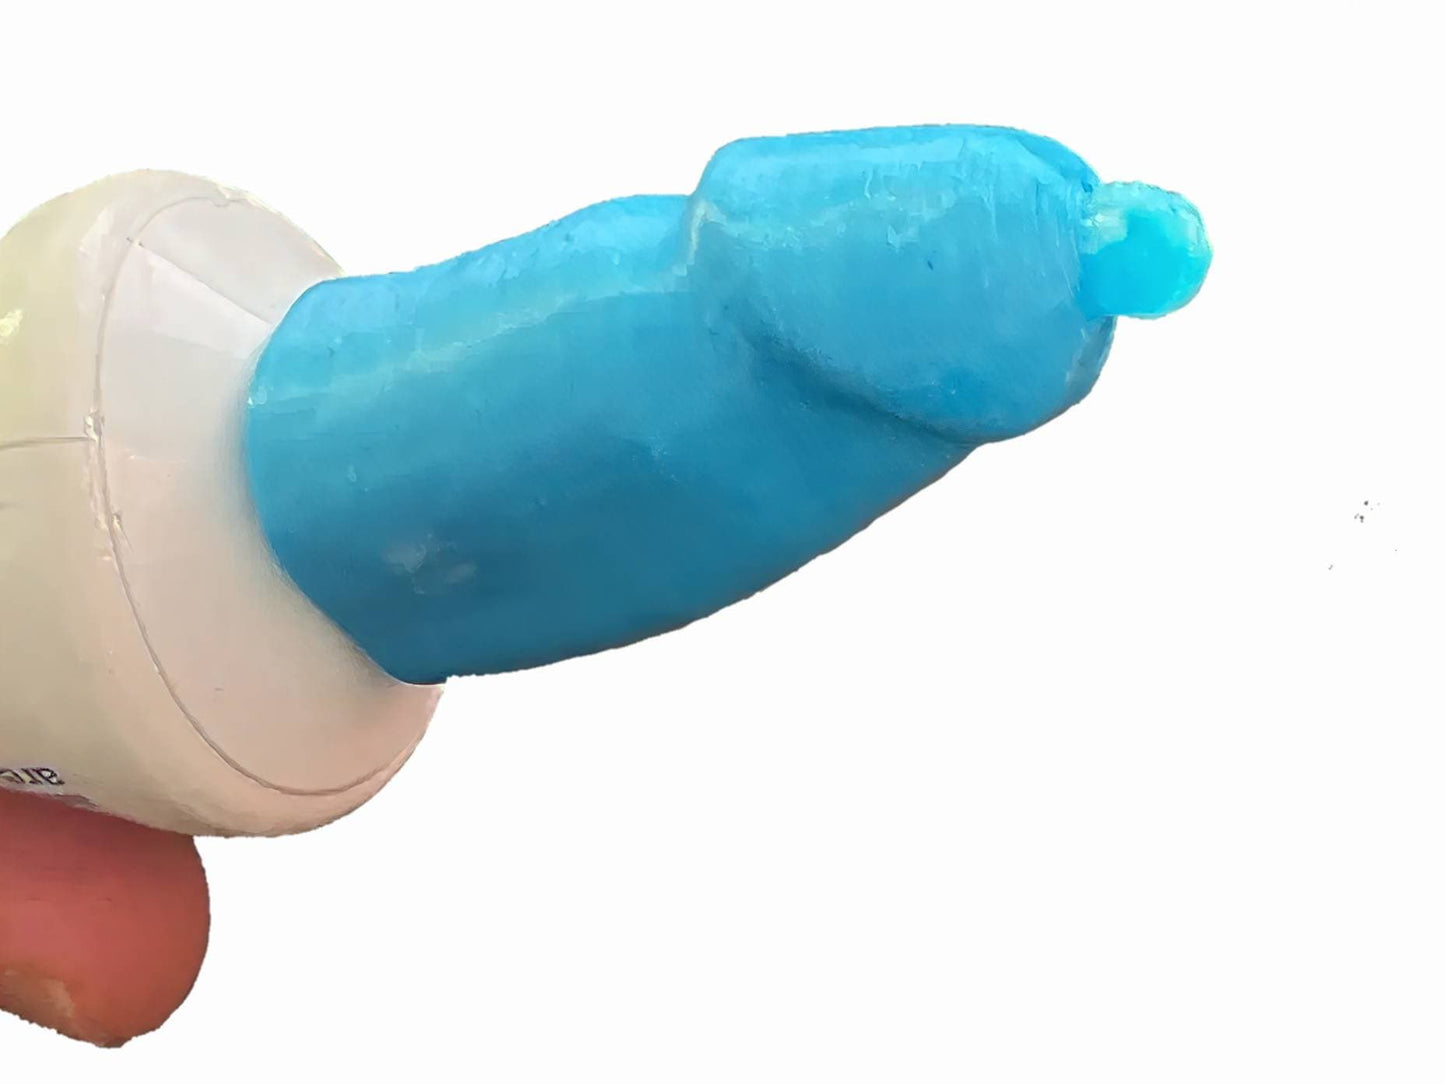 Dick Head Toothpaste Caps Funny Penis Shaped Gift Novelty Prank